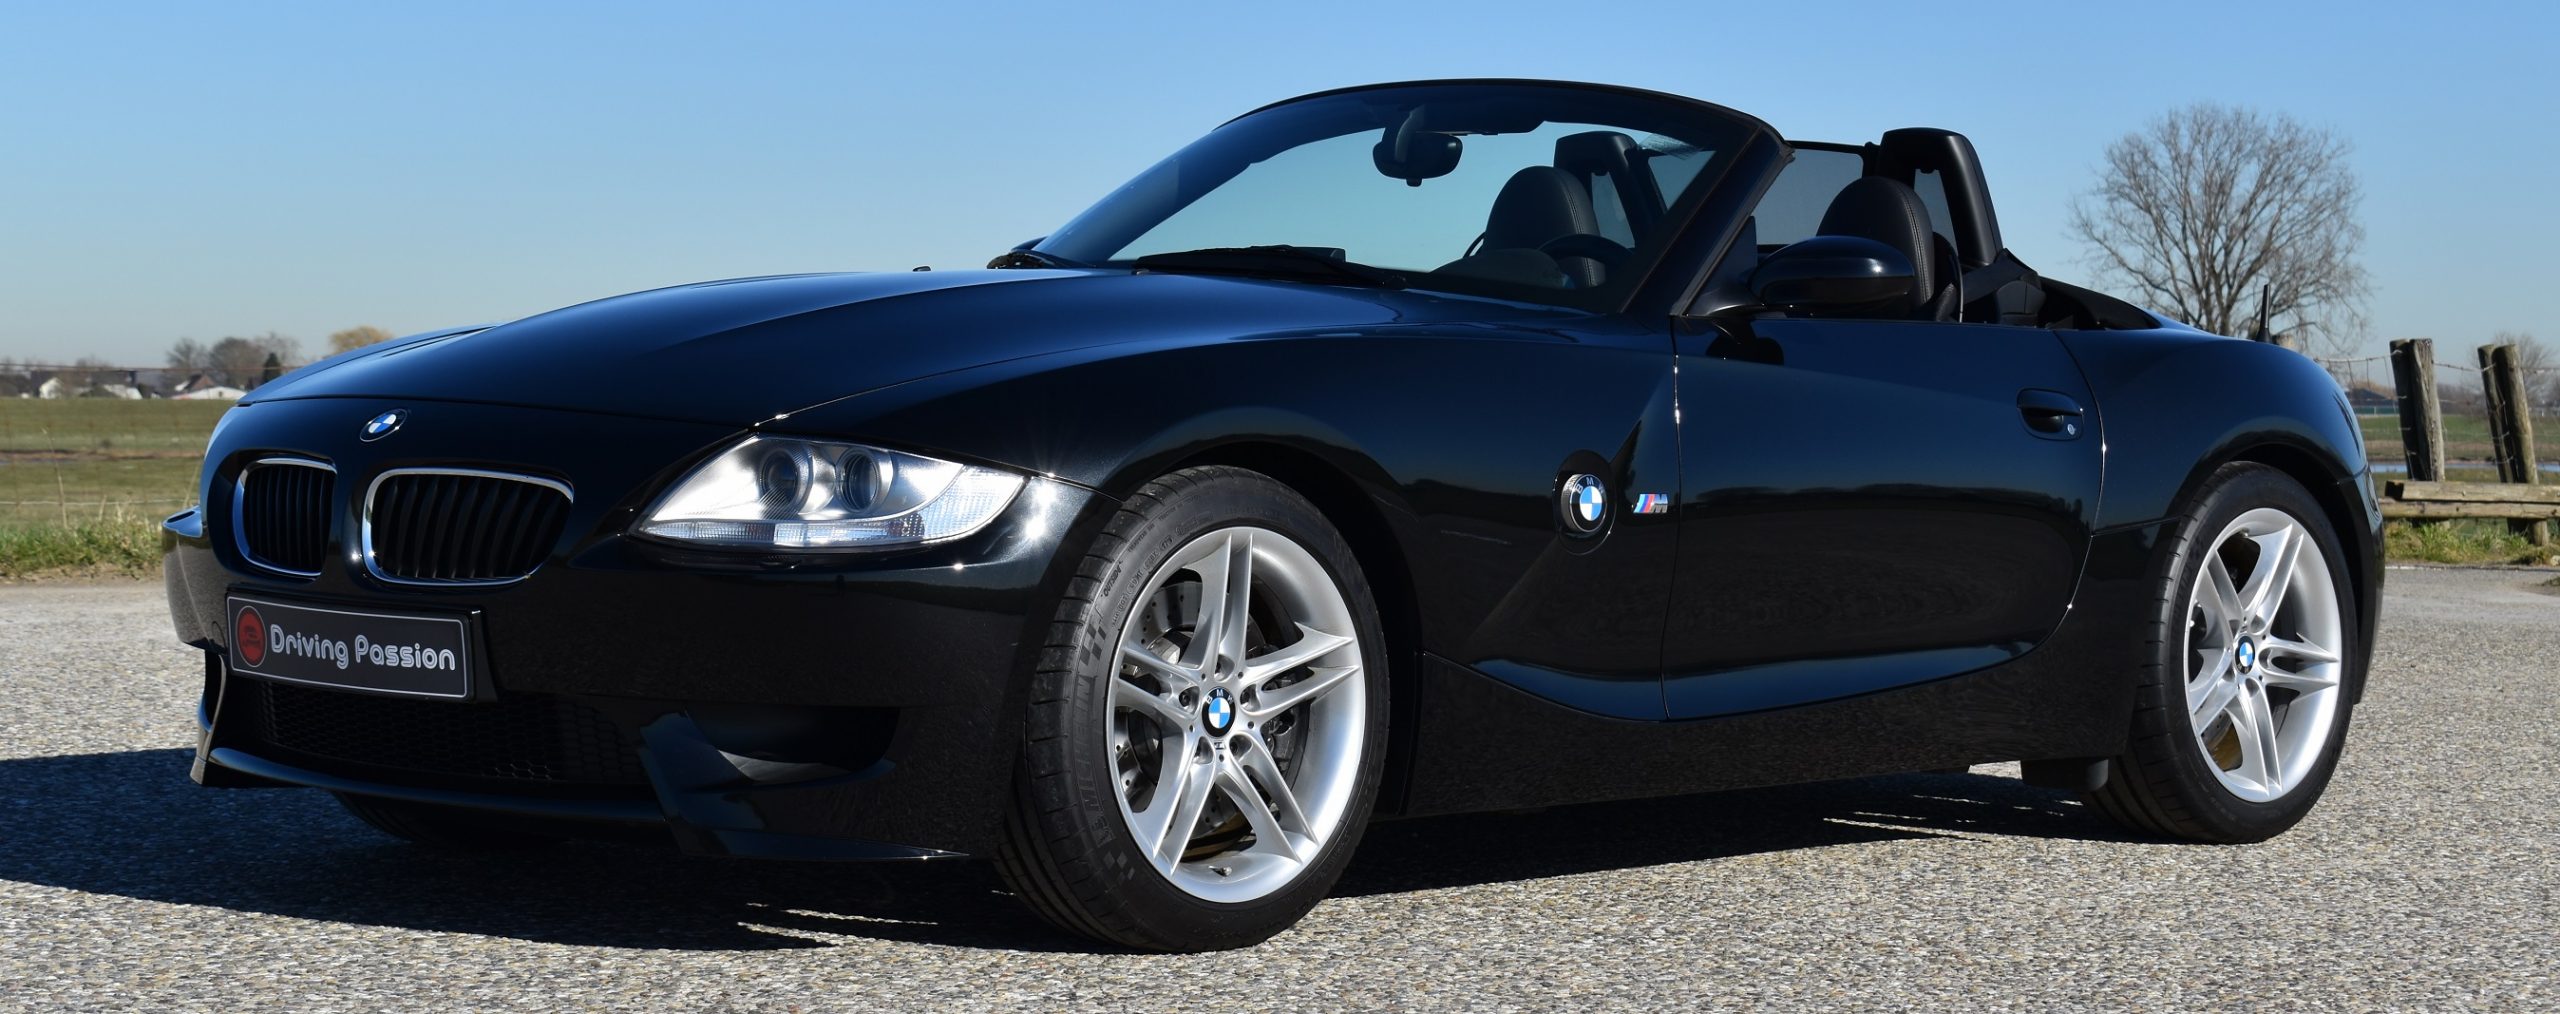 BMW Z4 Roadster | Driving Passion